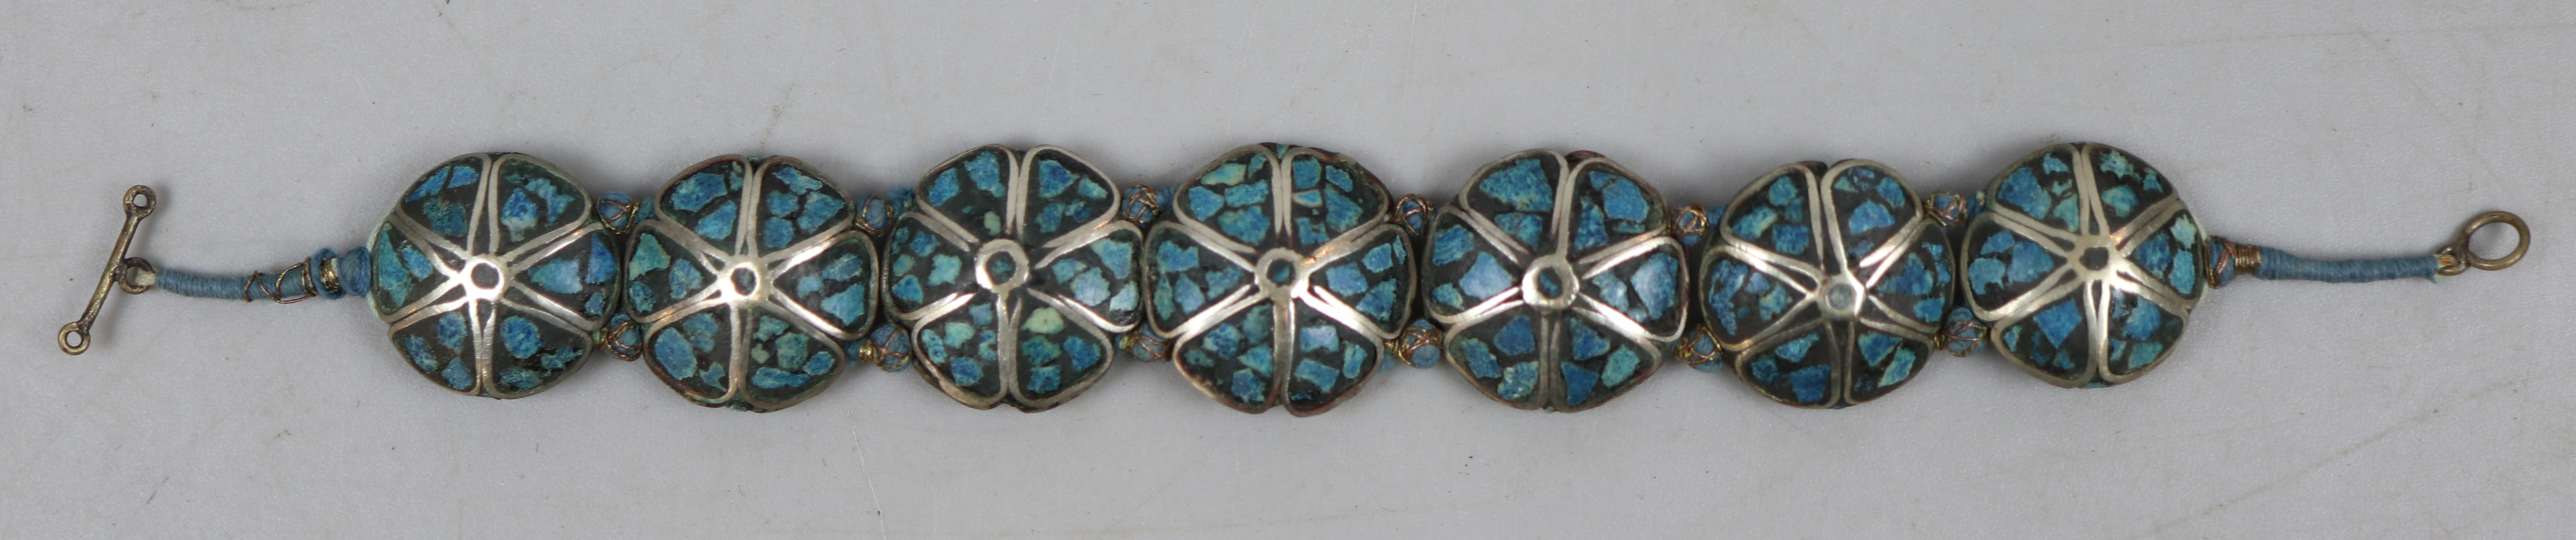 Vintage Himalayan / Tibet silver & turquoise necklaces - Image 5 of 7